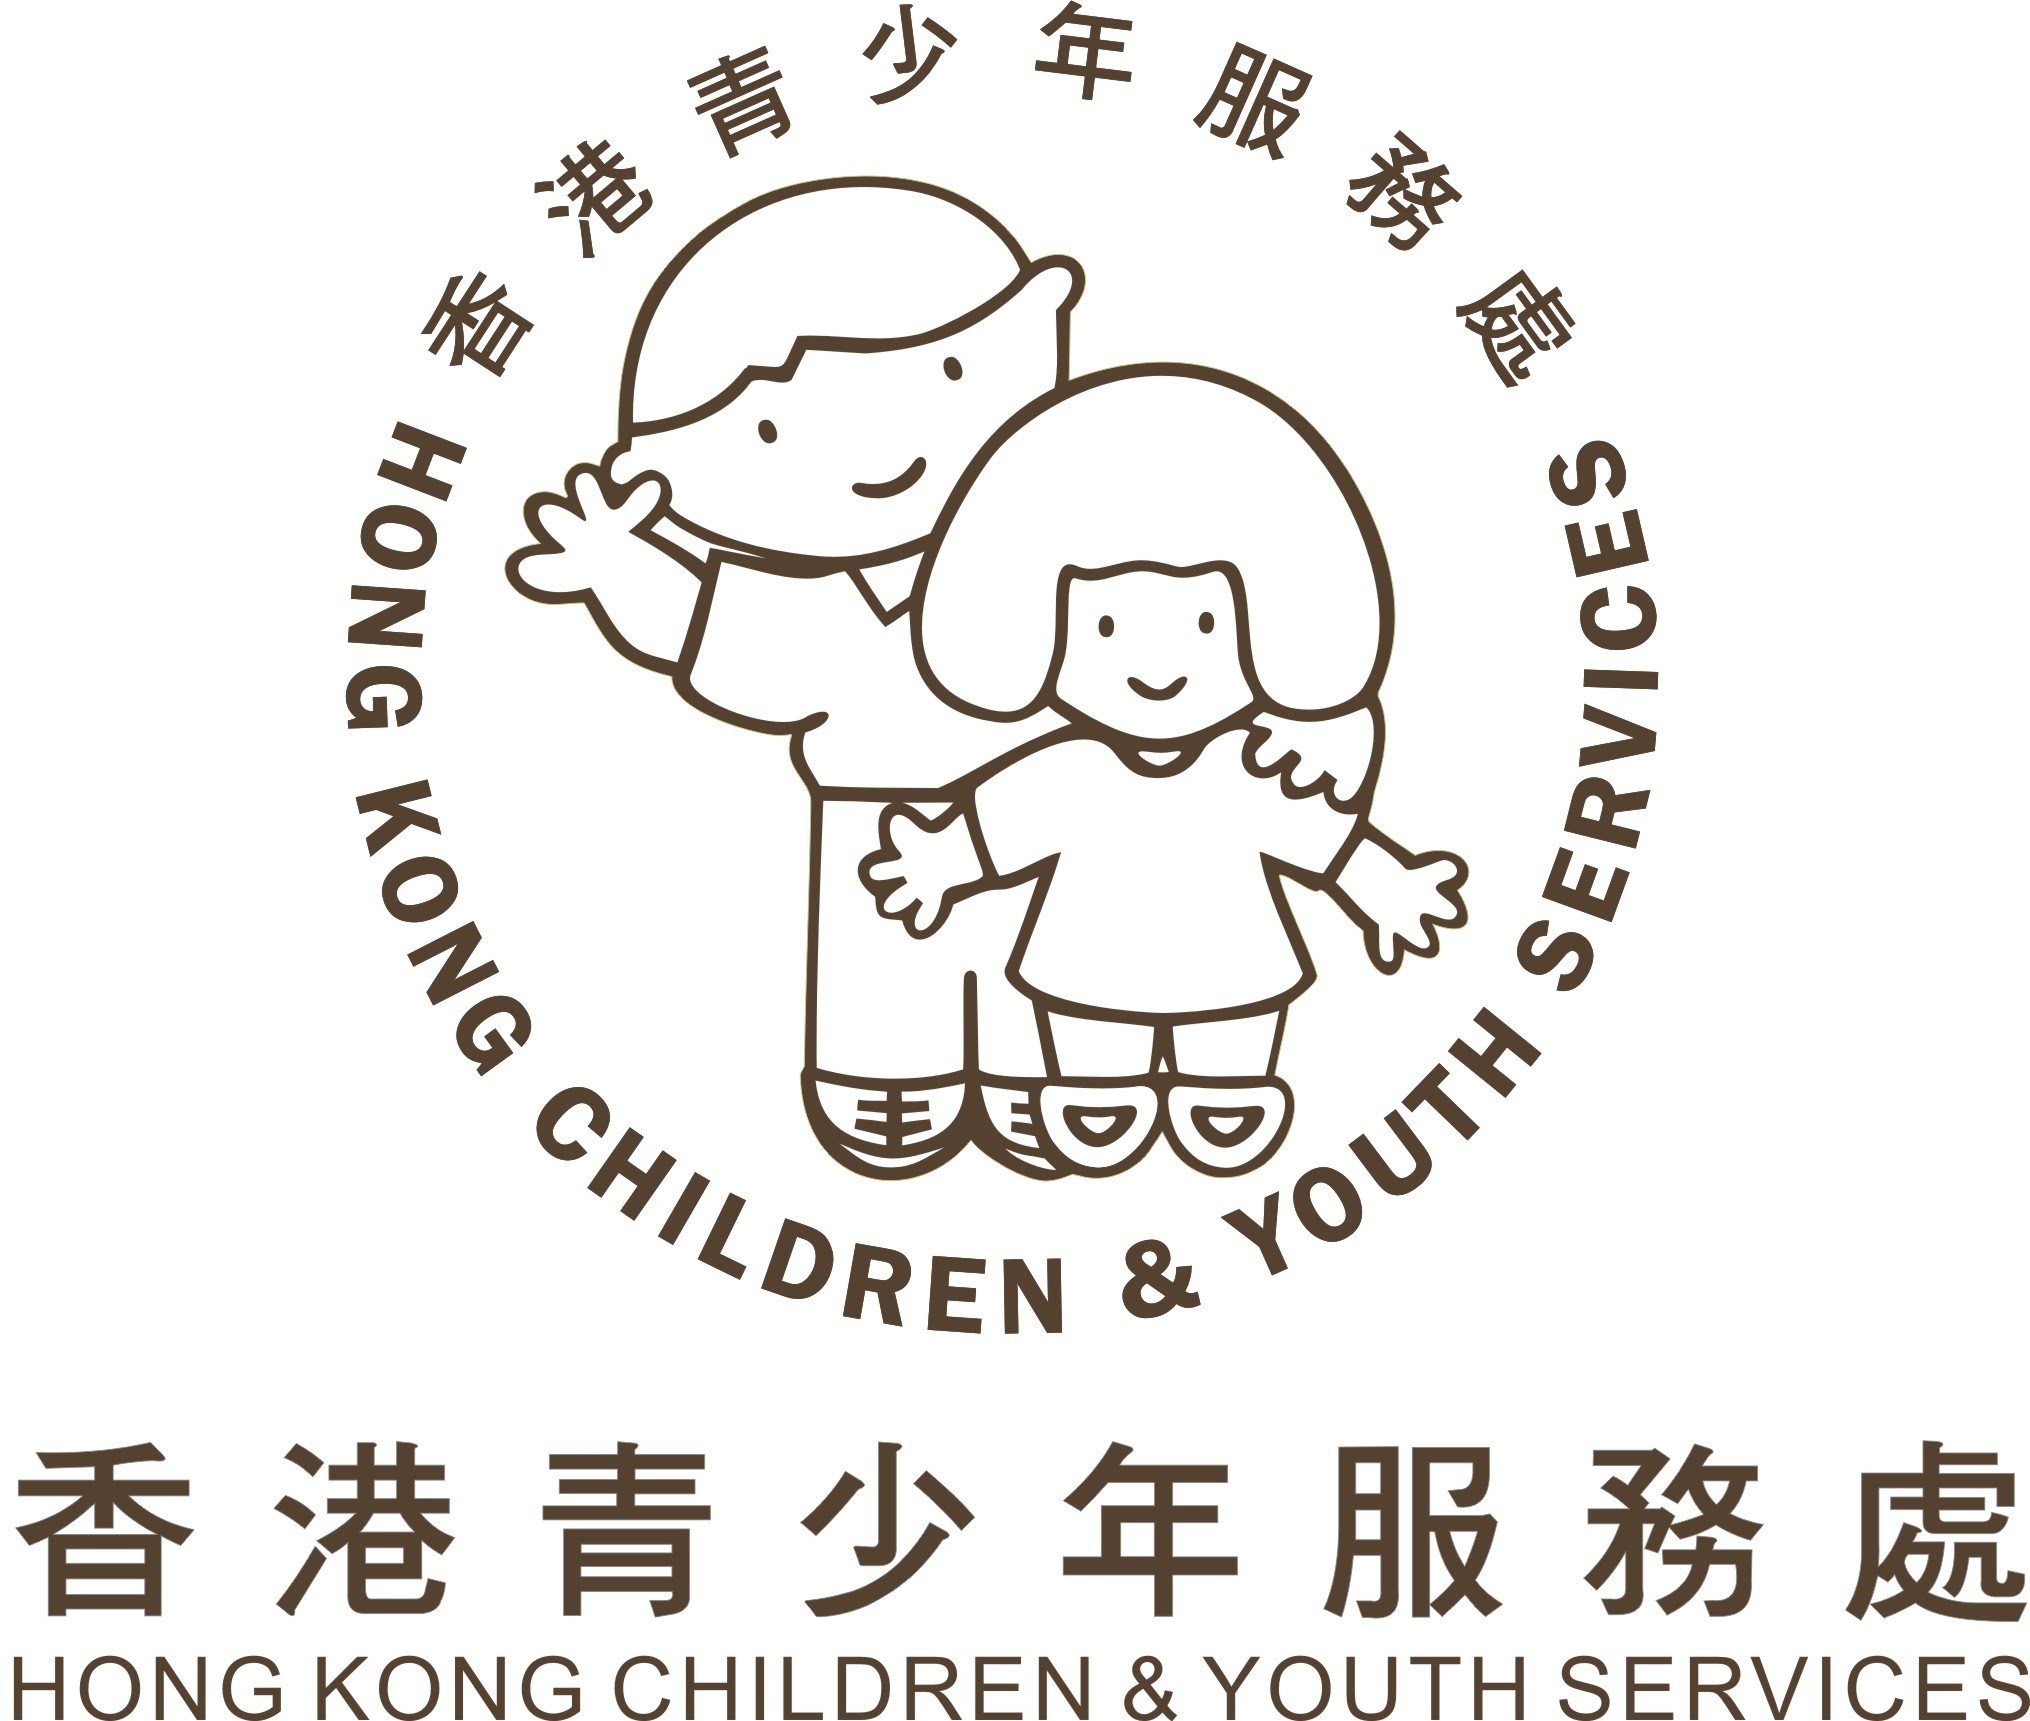 Hong Kong Children & Youth Services Growth Centre heartstrings